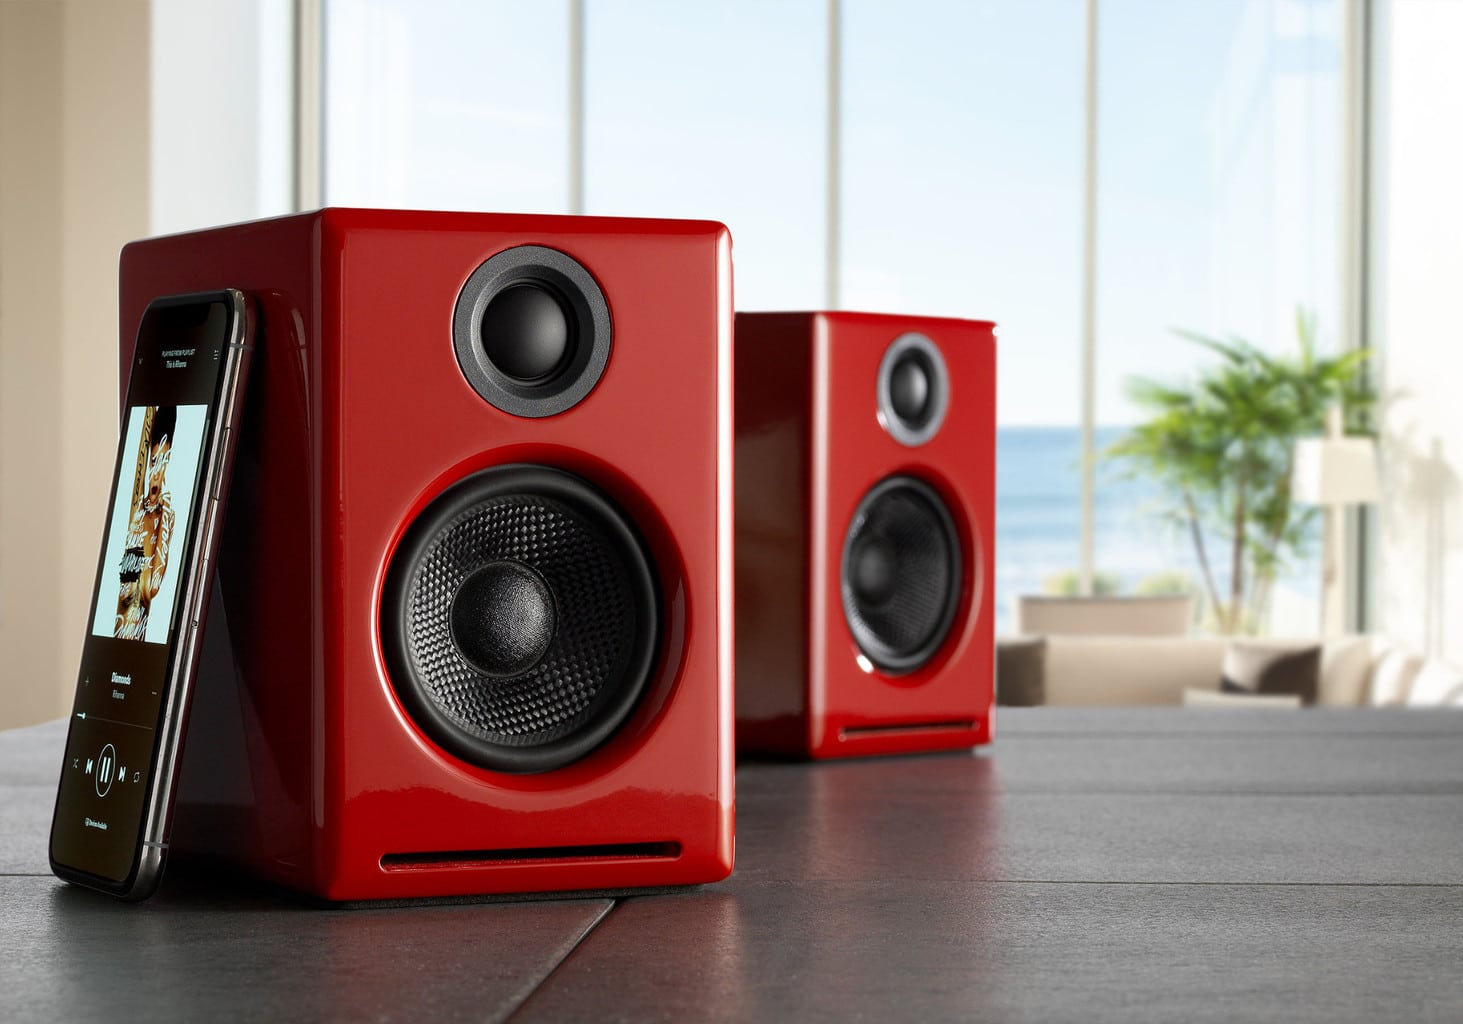 What Is The Difference Between Active and Passive Speakers?